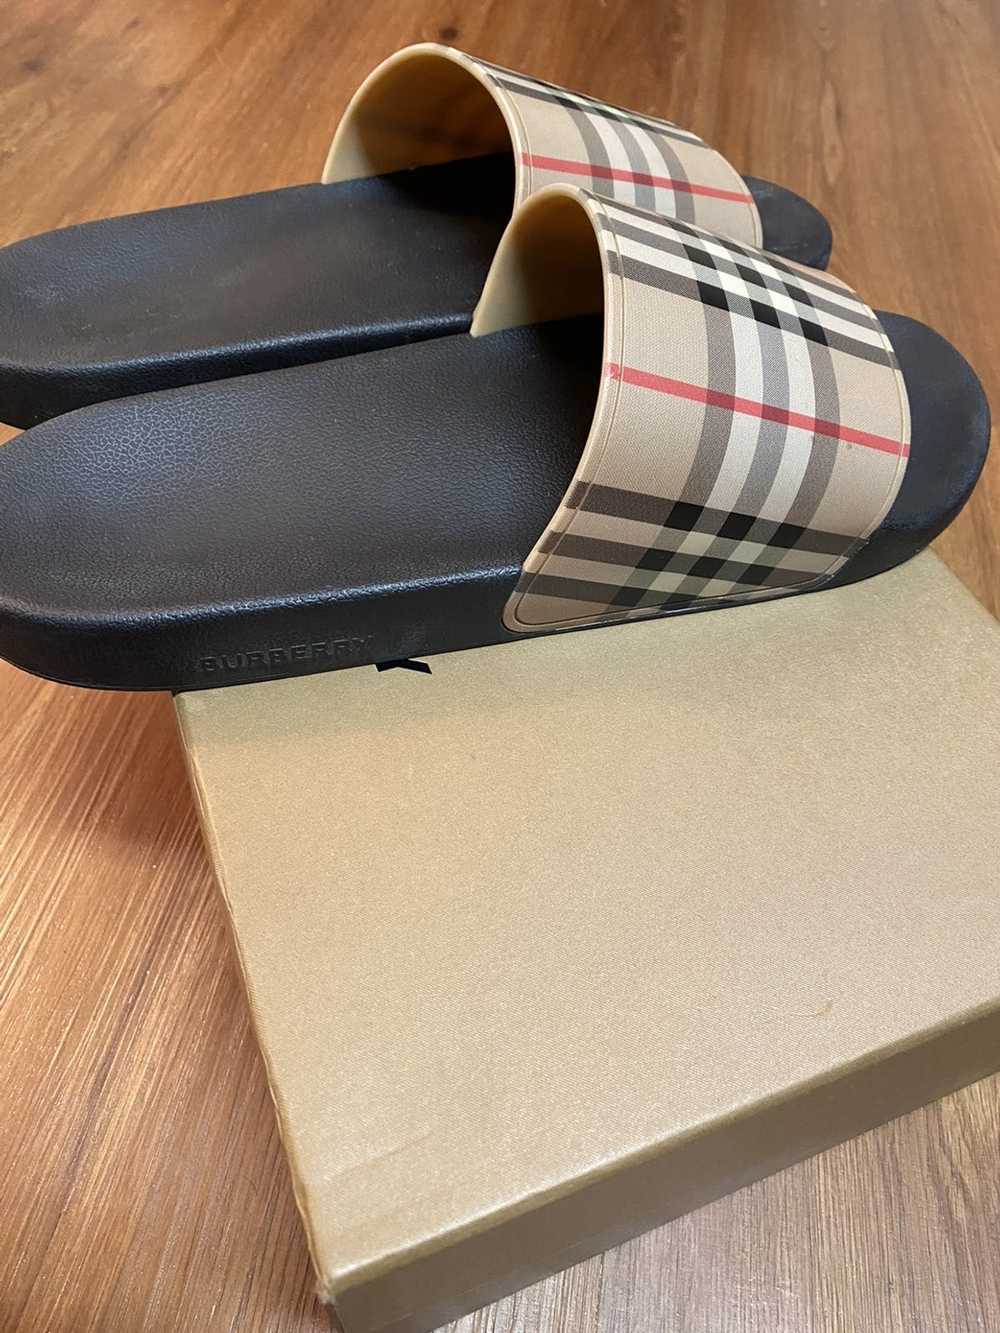 Burberry Burberry Furley Check Pool slides size 12 - image 7